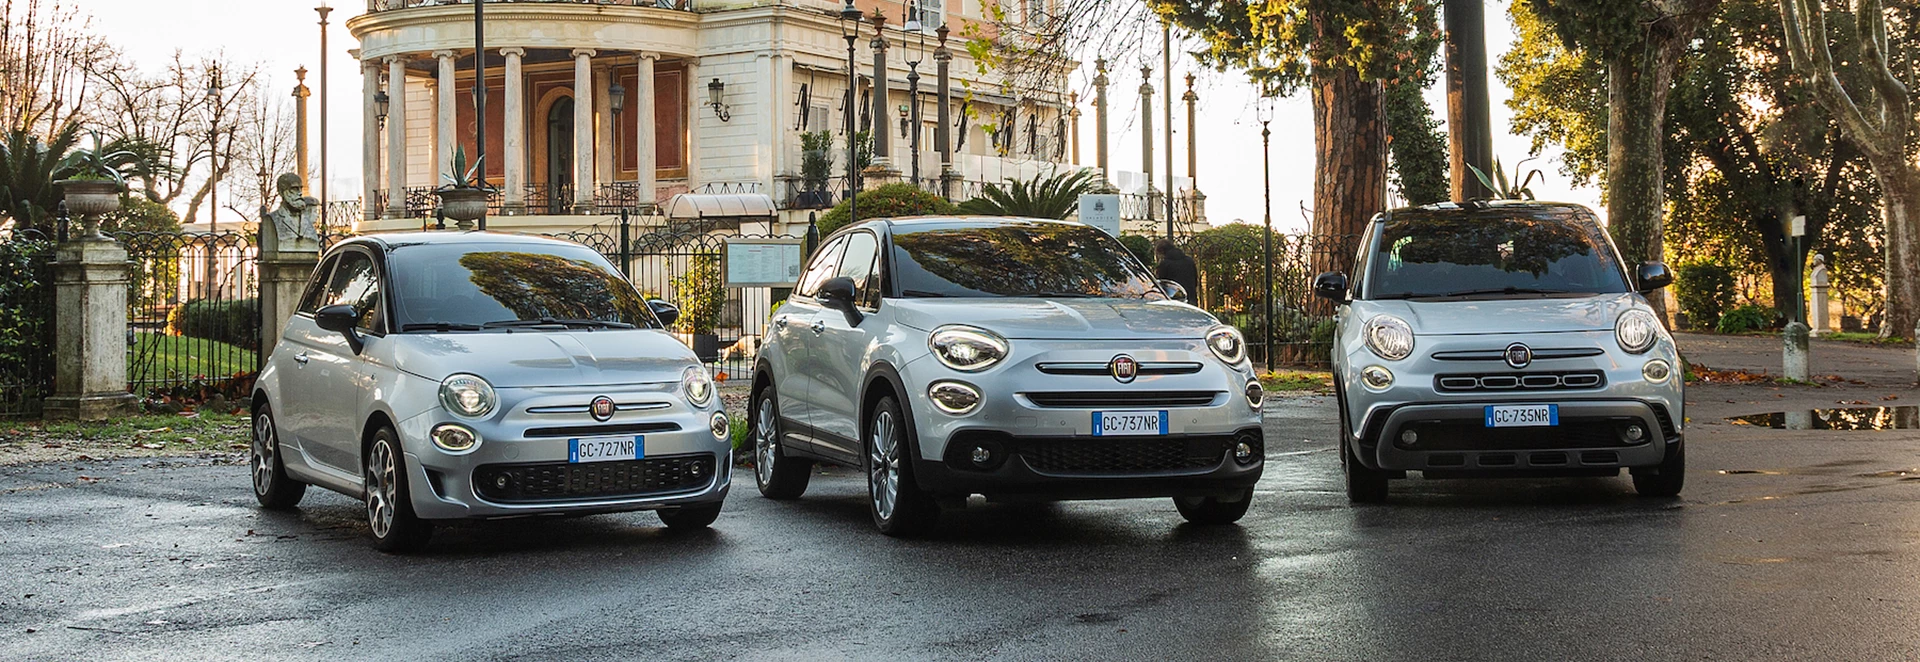 Fiat updates 500 line-up for 2021 